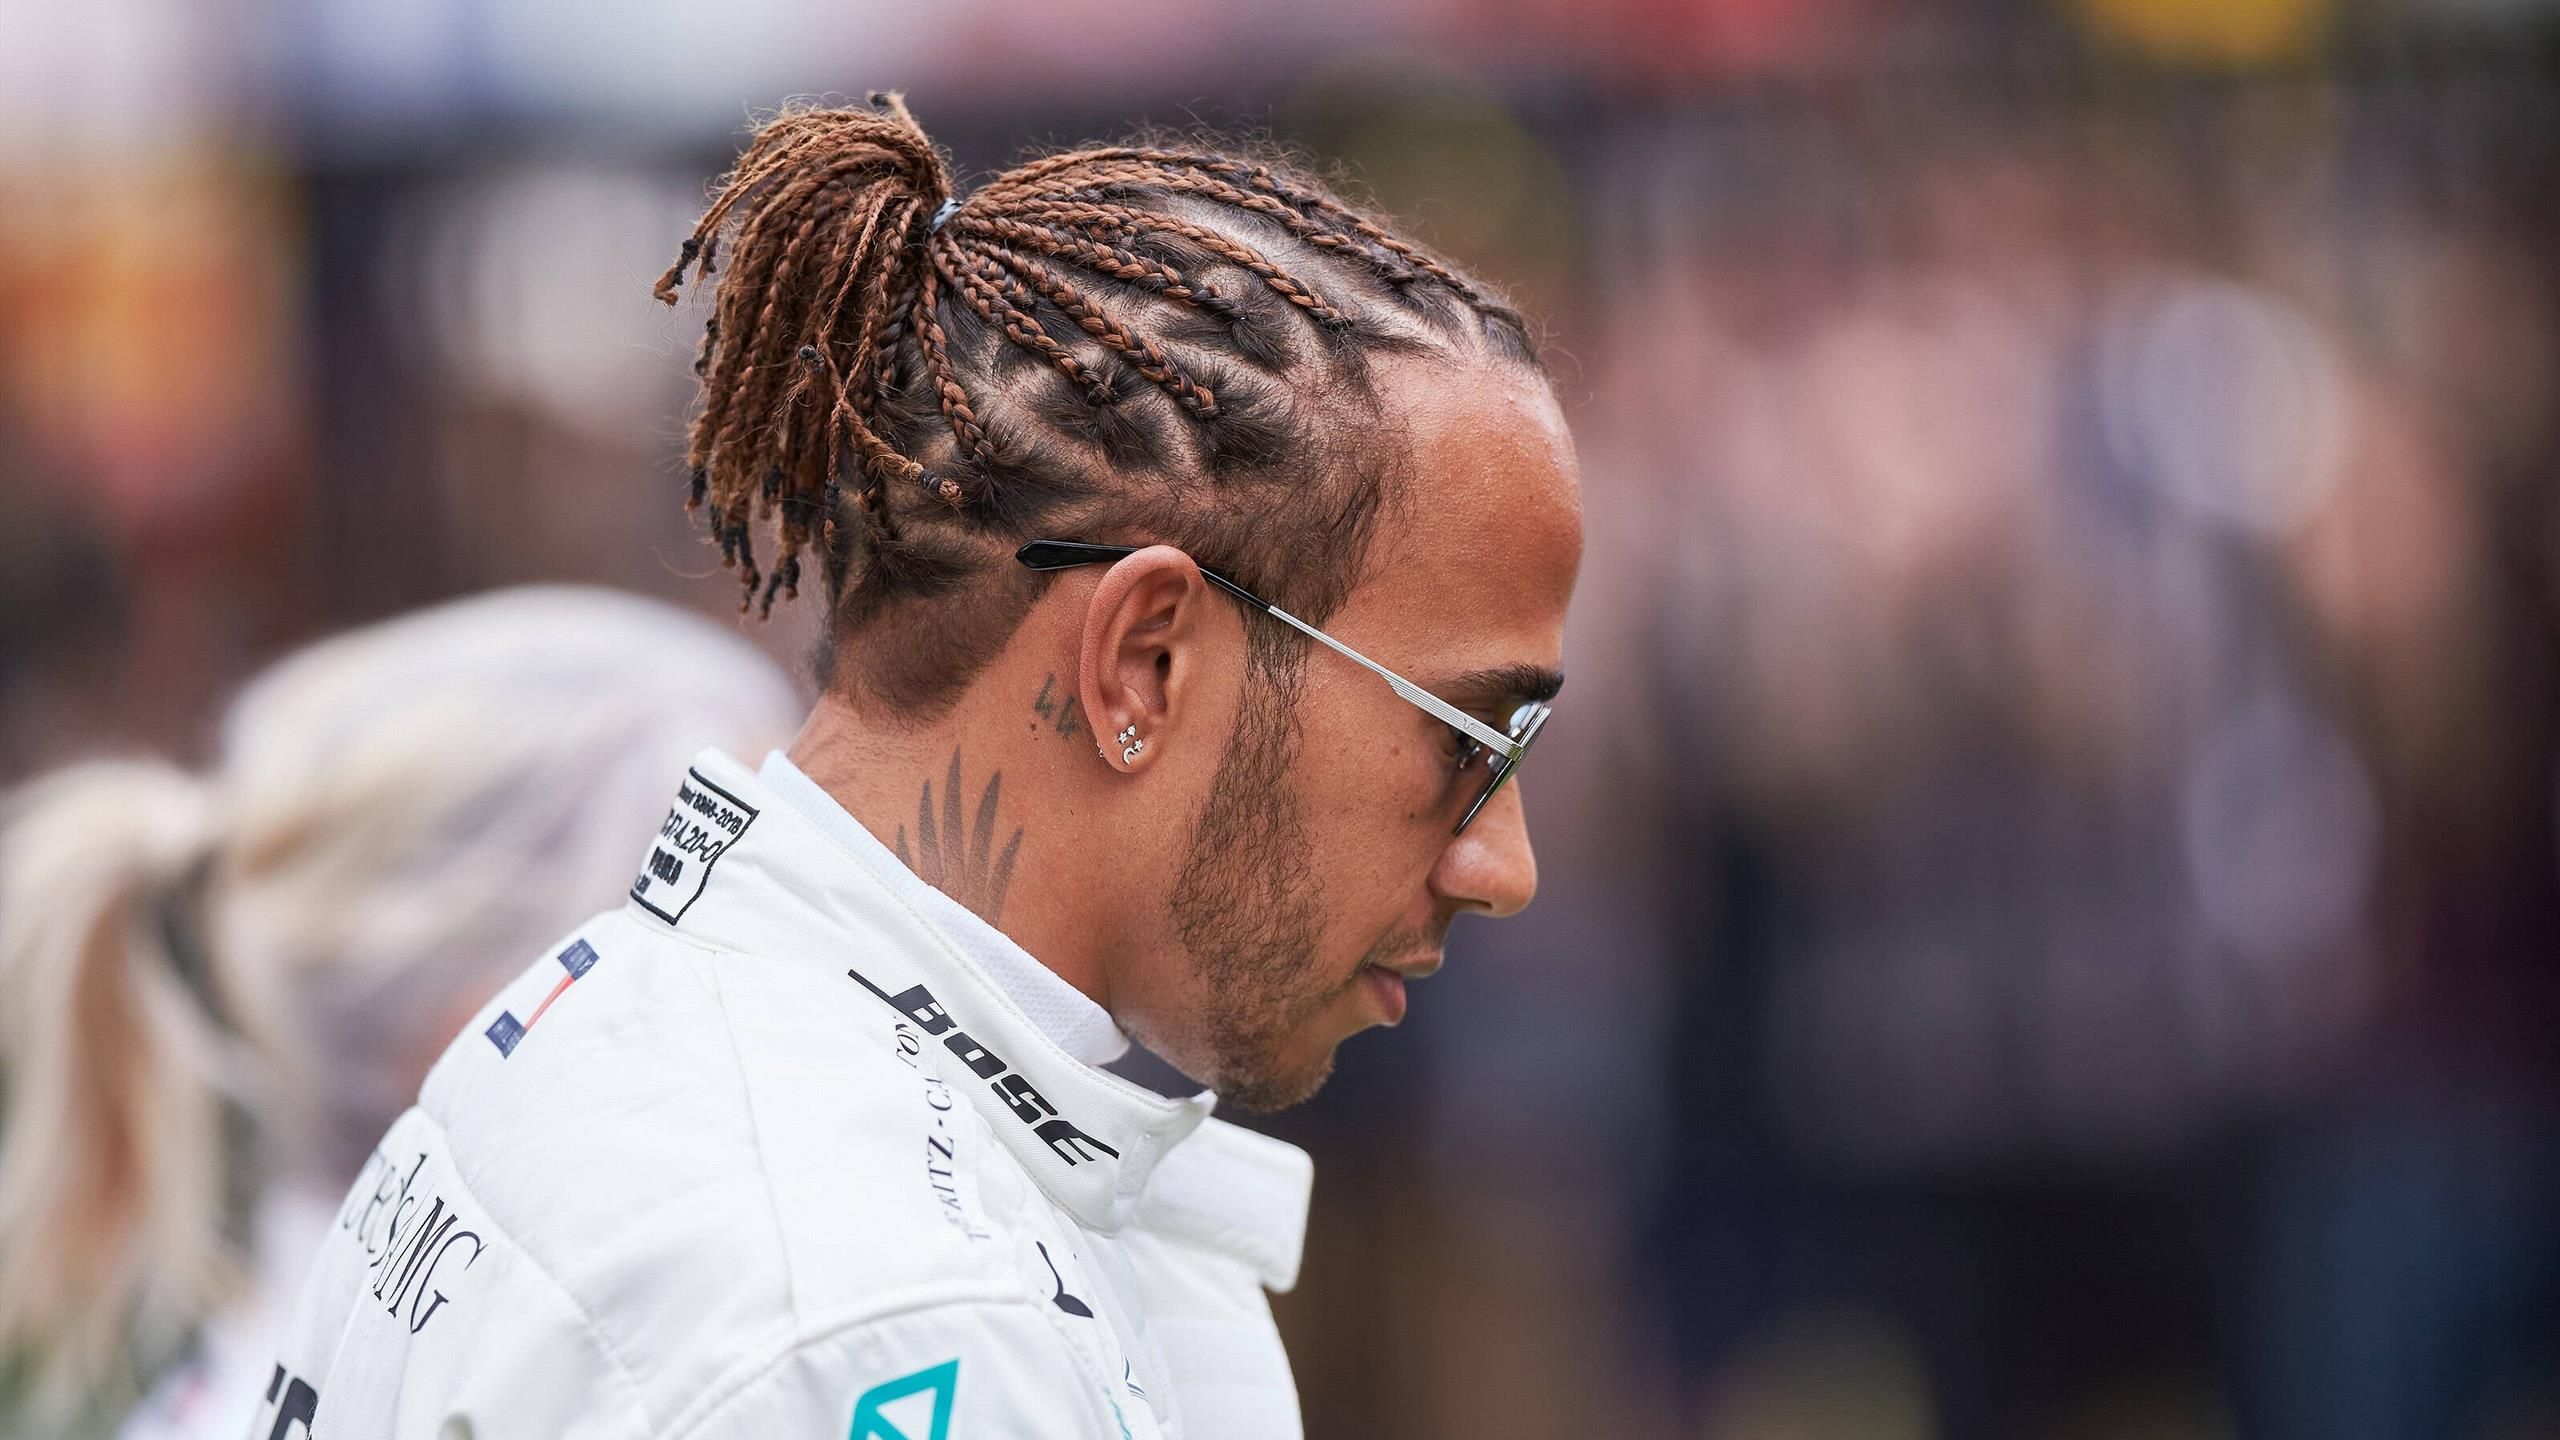 Lewis Hamilton says three or fourstop race is possible  PlanetF1   PlanetF1